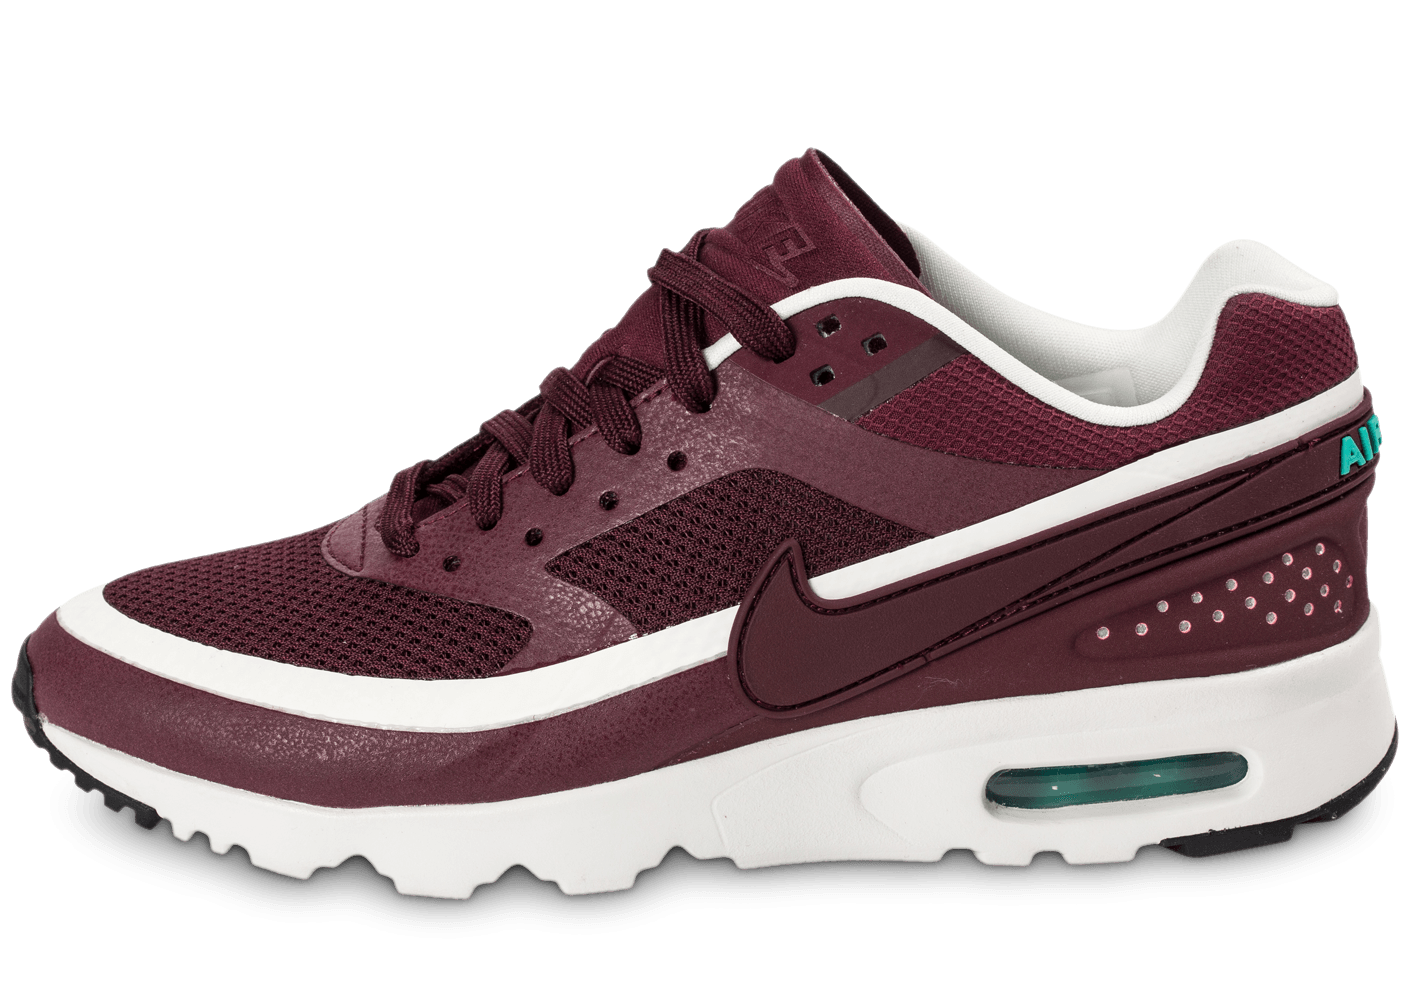 Nike Air Max bw Chaussures, Cliquez pour zoomer Chaussures Nike Air Max BW Ultra W bordeaux vue extérieure ...